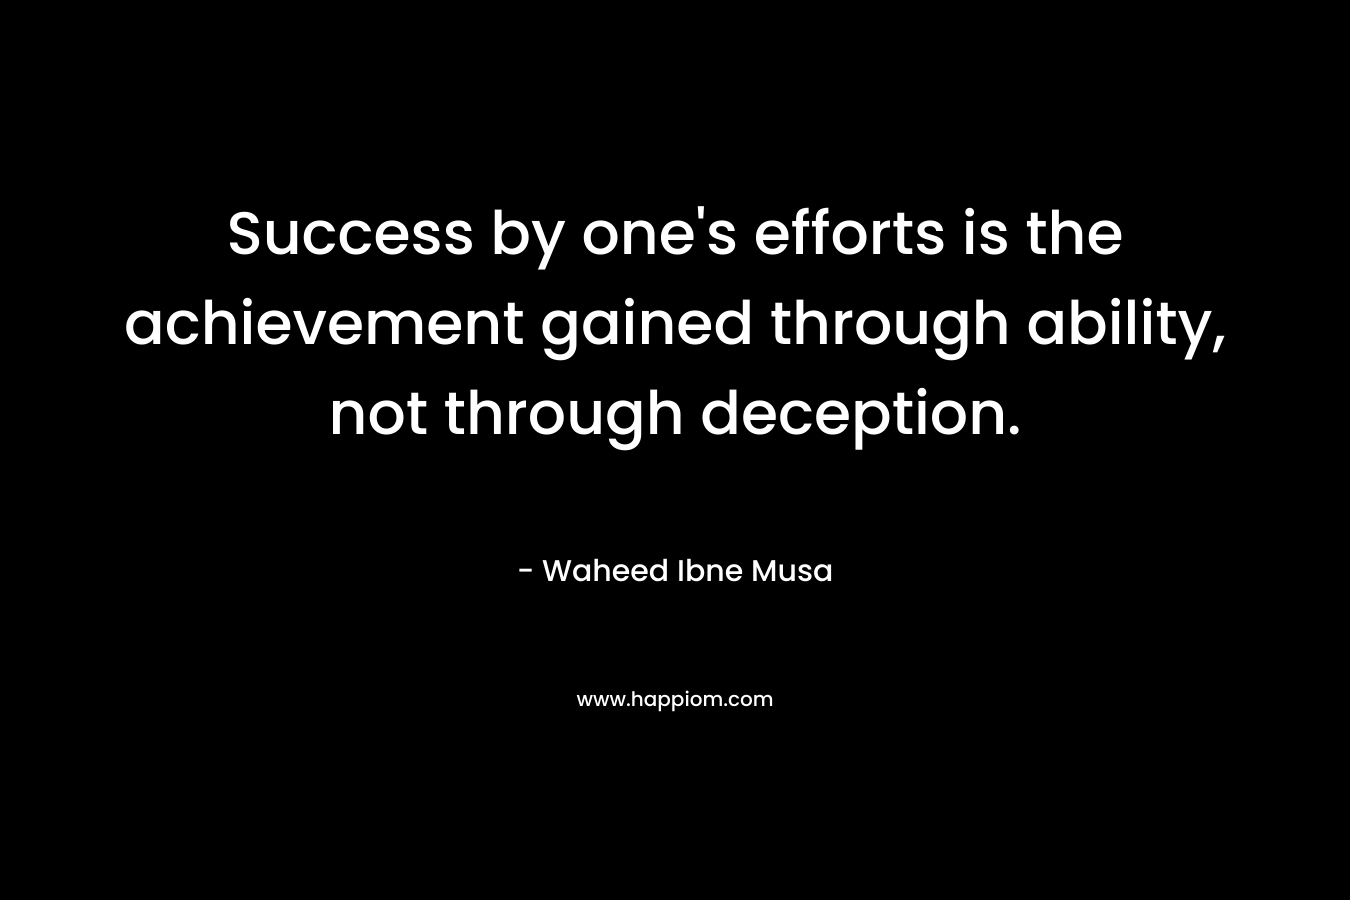 Success by one’s efforts is the achievement gained through ability, not through deception. – Waheed Ibne Musa